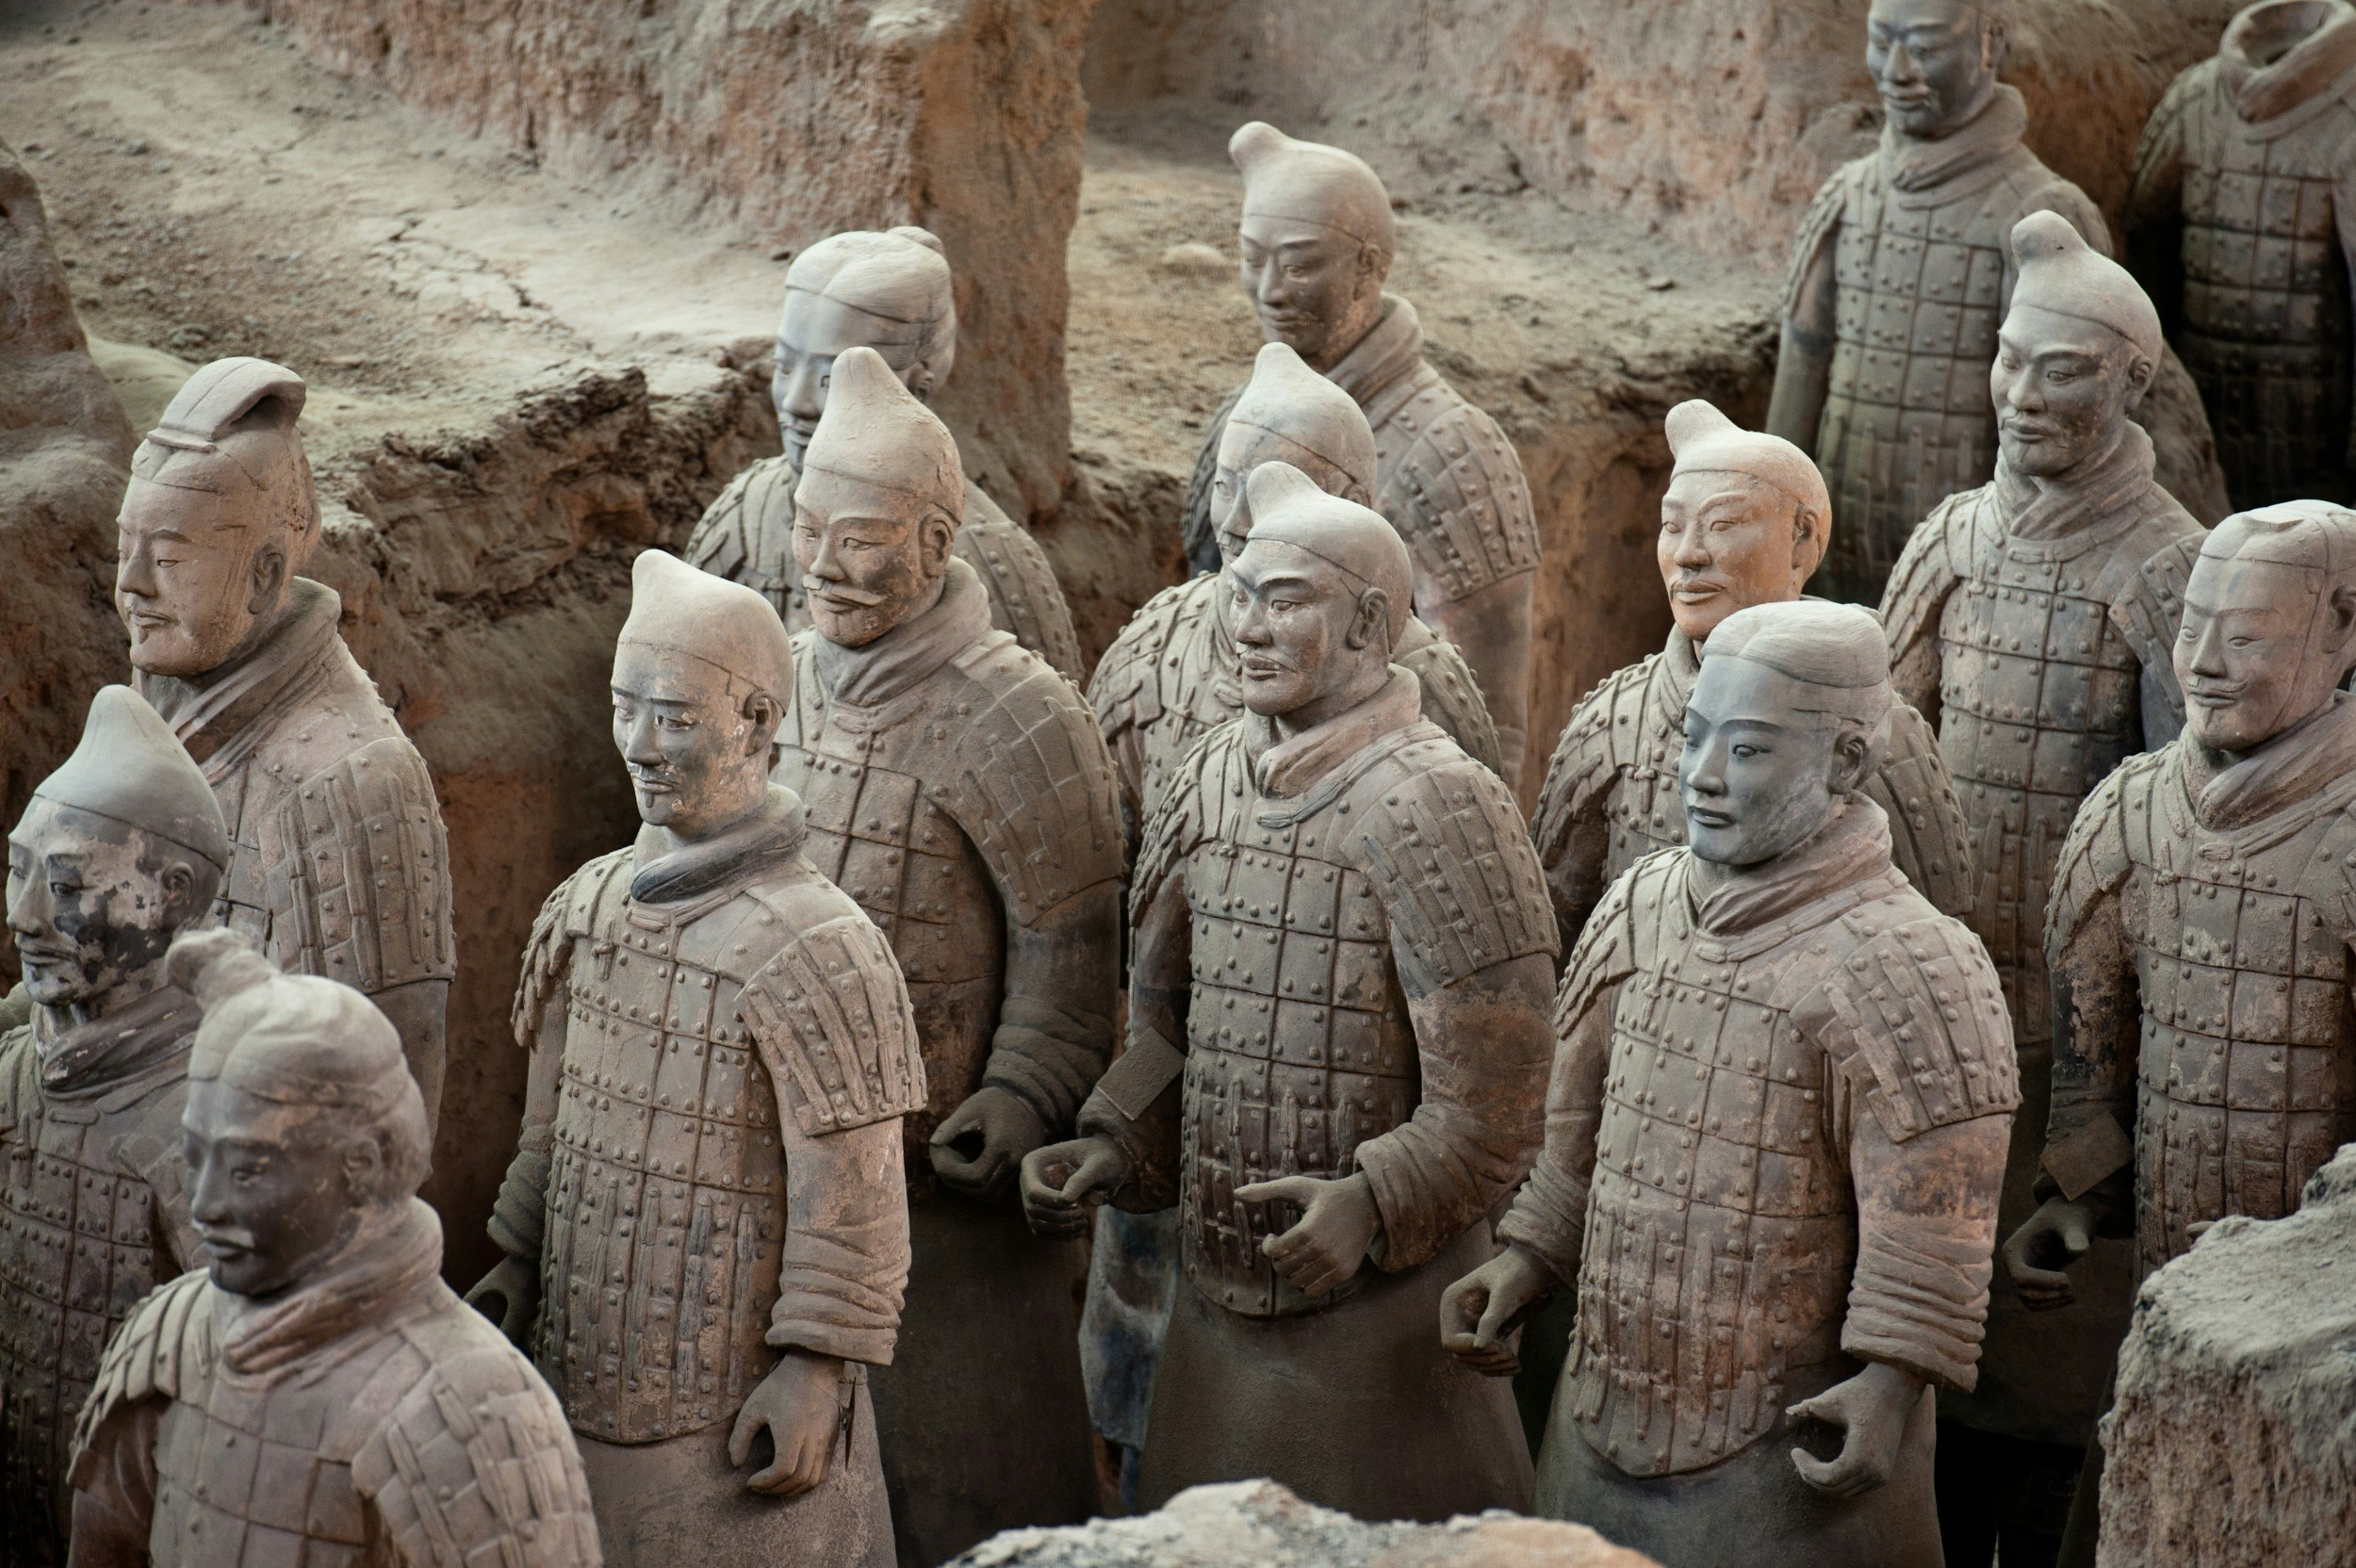 A section of over 8000 Terracotta Warriors in the mausoleum of the first Qin emperor outside Xian, China.